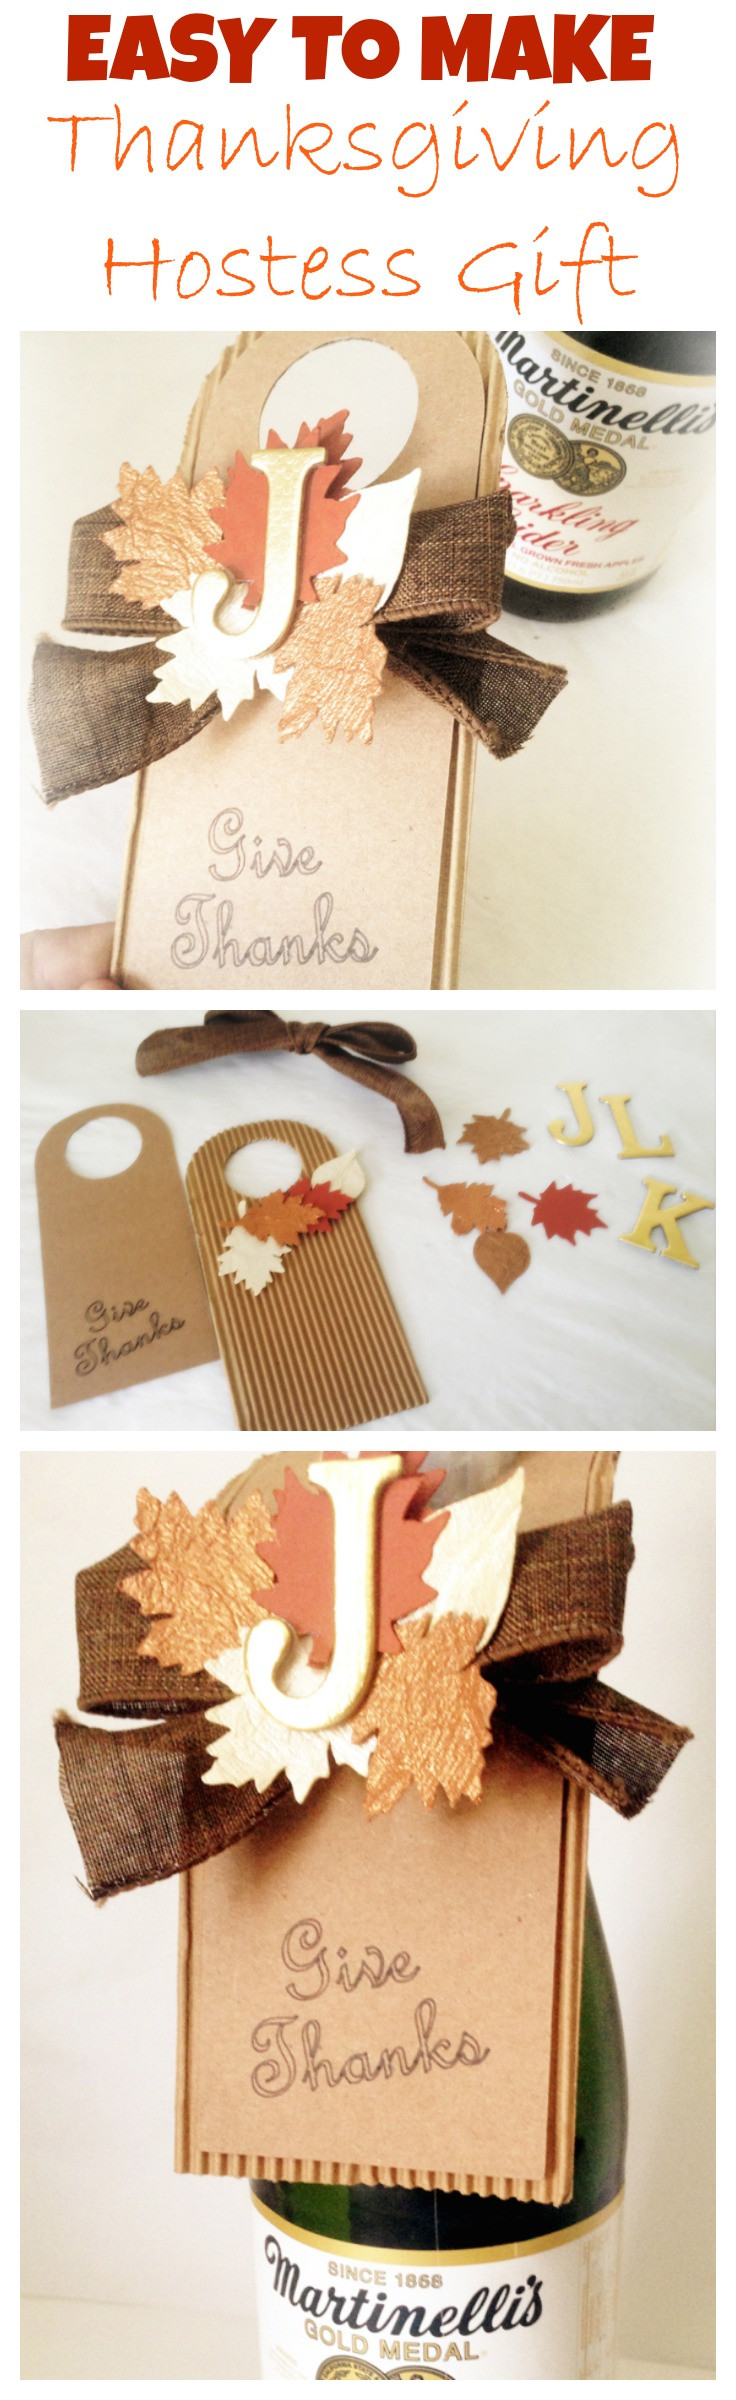 Gift Ideas For Thanksgiving Hostess
 Quick and Easy Thanksgiving Hostess Gift Idea DIY